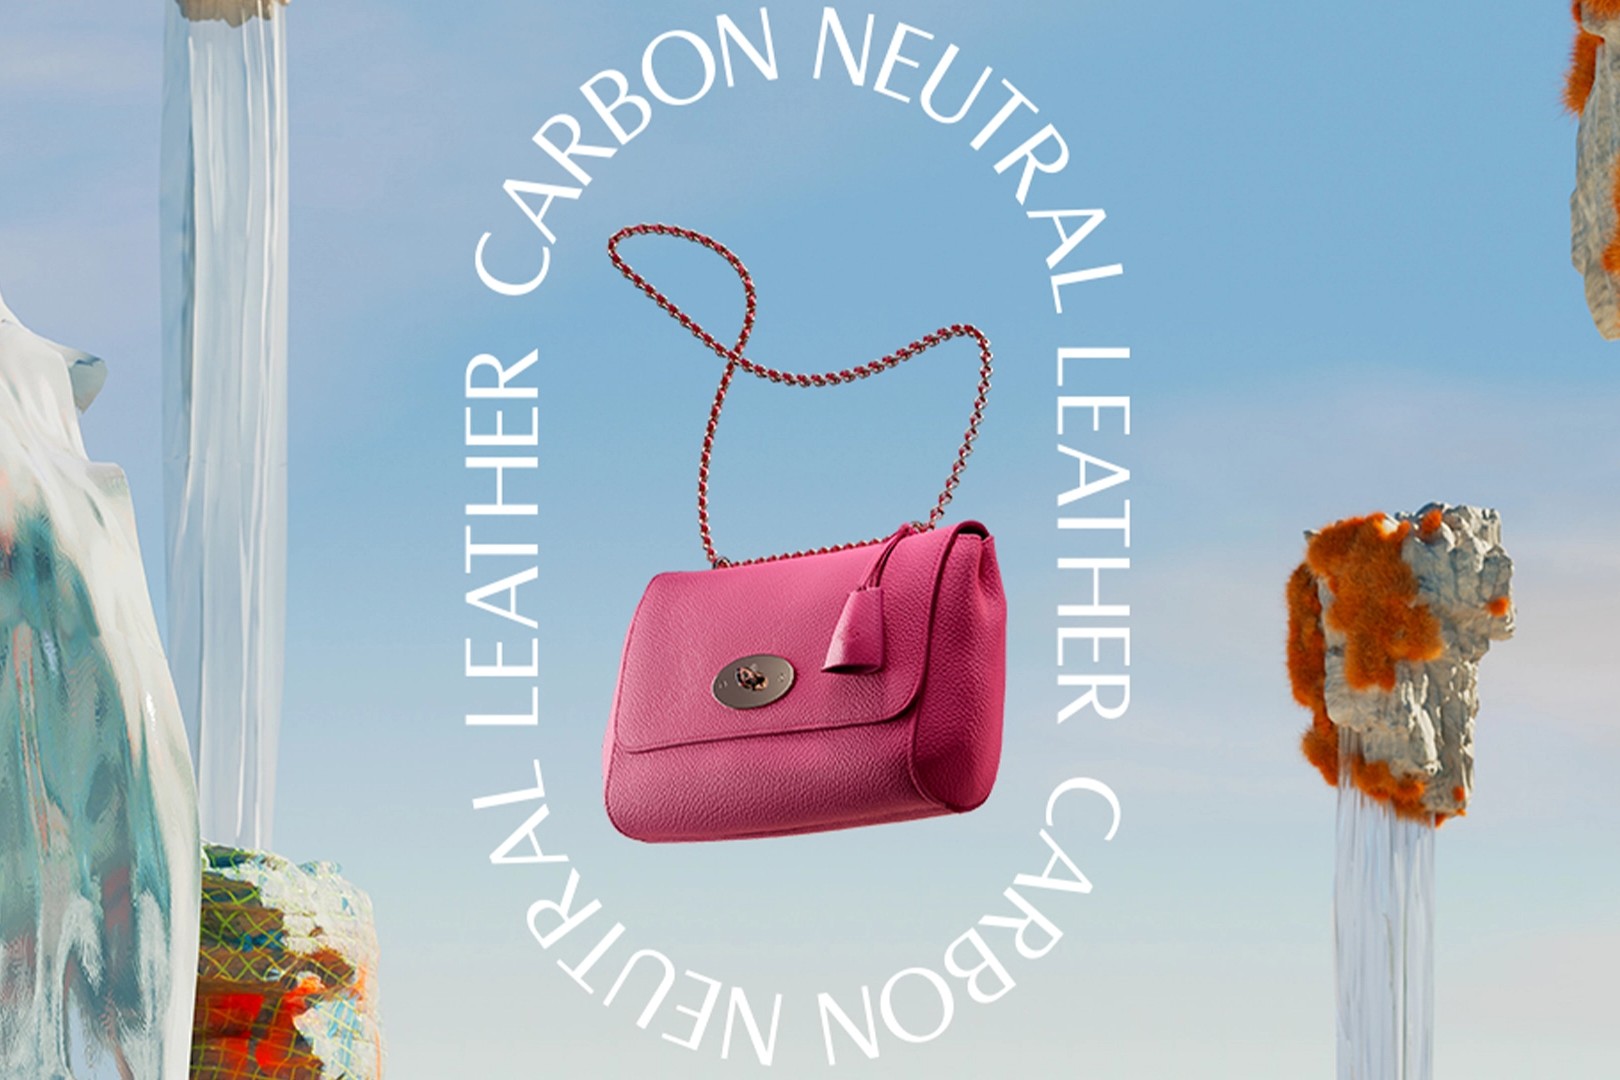 Mulberry launches its first carbon-neutral bag range